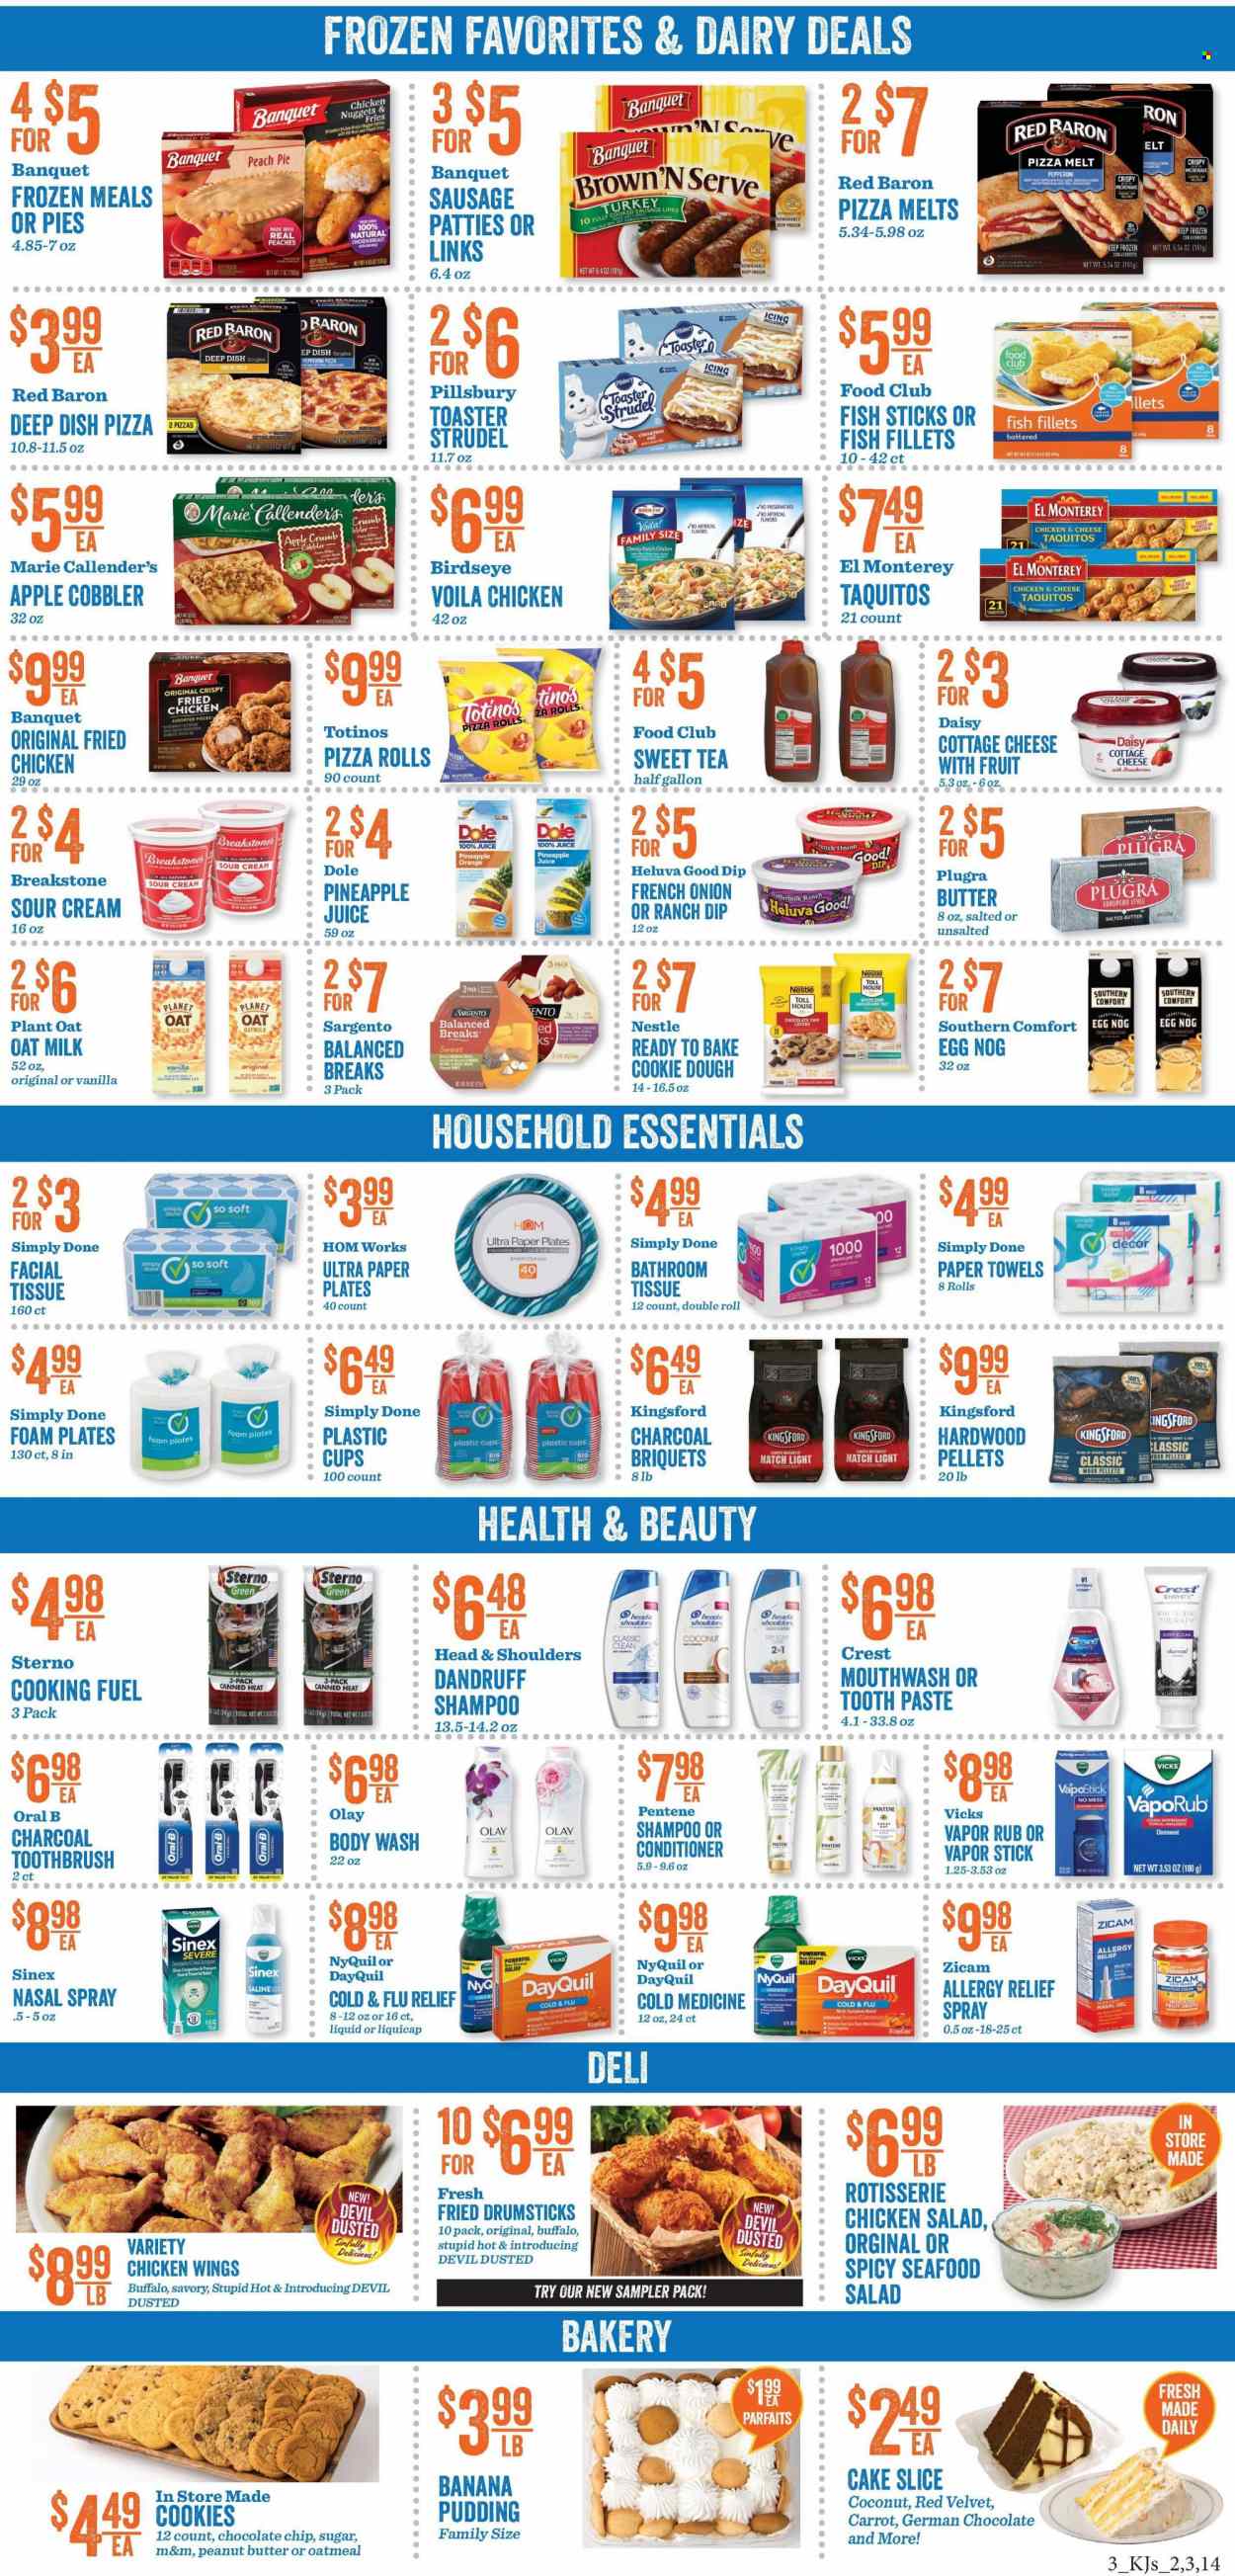 thumbnail - KJ´s Market Flyer - 11/30/2022 - 12/06/2022 - Sales products - cake, pie, pizza rolls, strudel, onion, Dole, strawberries, pineapple, oranges, chayote, fish fillets, seafood, fish fingers, fish sticks, pizza, chicken roast, fried chicken, Pillsbury, Bird's Eye, Marie Callender's, taquitos, Kingsford, sausage, pepperoni, seafood salad, chicken salad, cottage cheese, Sargento, pudding, buttermilk, oat milk, eggs, salted butter, sour cream, dip, chicken wings, Red Baron, cookie dough, cookies, Nestlé, M&M's, oatmeal, cinnamon, peanut butter, macadamia nuts, pineapple juice, juice, tea, Ron Pelicano, ointment, bath tissue, kitchen towels, paper towels, body wash, shampoo, toothbrush, Oral-B, toothpaste, mouthwash, charcoal toothbrush, Crest, Olay, conditioner, Head & Shoulders, Pantene, Vicks, plate, cup, paper plate, foam plates, briquettes, charcoal, DayQuil, Cold & Flu, NyQuil, VapoRub, nasal spray, allergy relief, Sinex, peaches. Page 3.